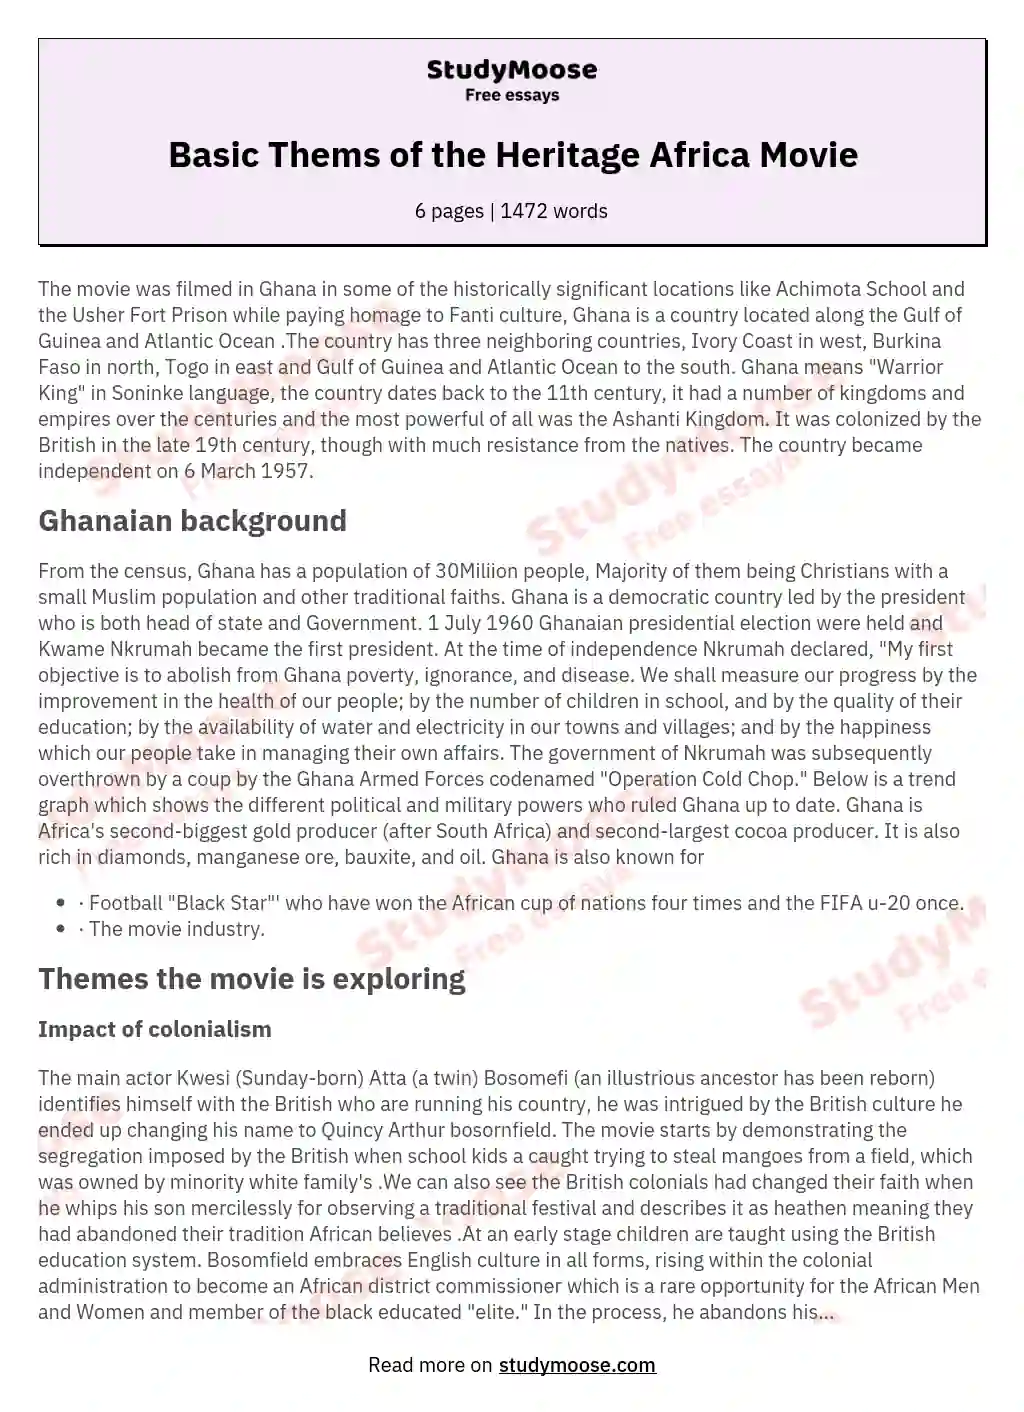 Basic Thems of the Heritage Africa Movie essay